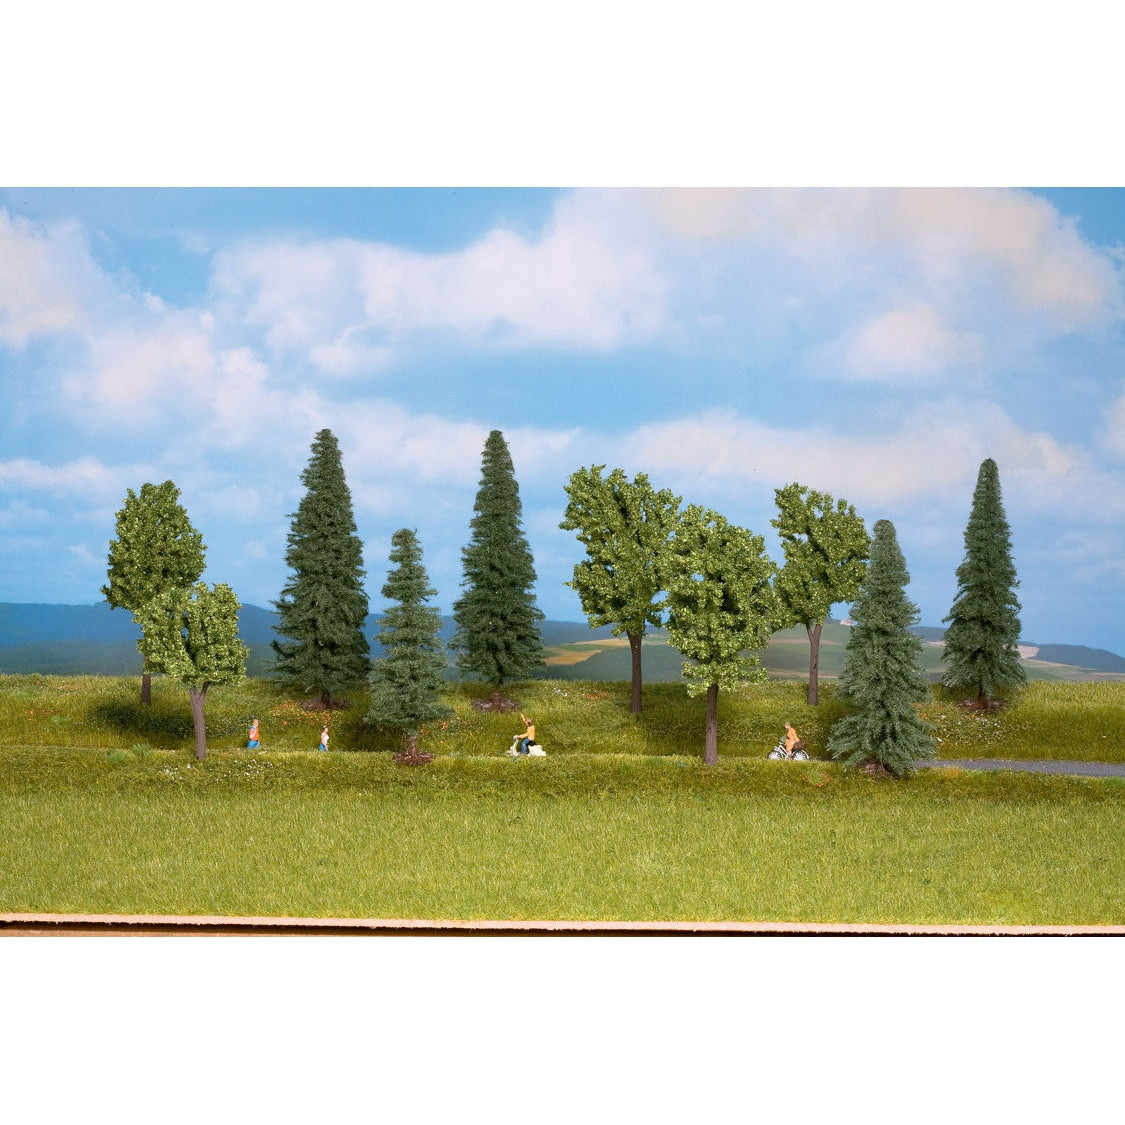 Walthers Mixed Deciduous & Pine Trees pkg(10) -- 1-9/16 to 3-3/8"  3.9 to 8.5cm (Includes Pin Base)